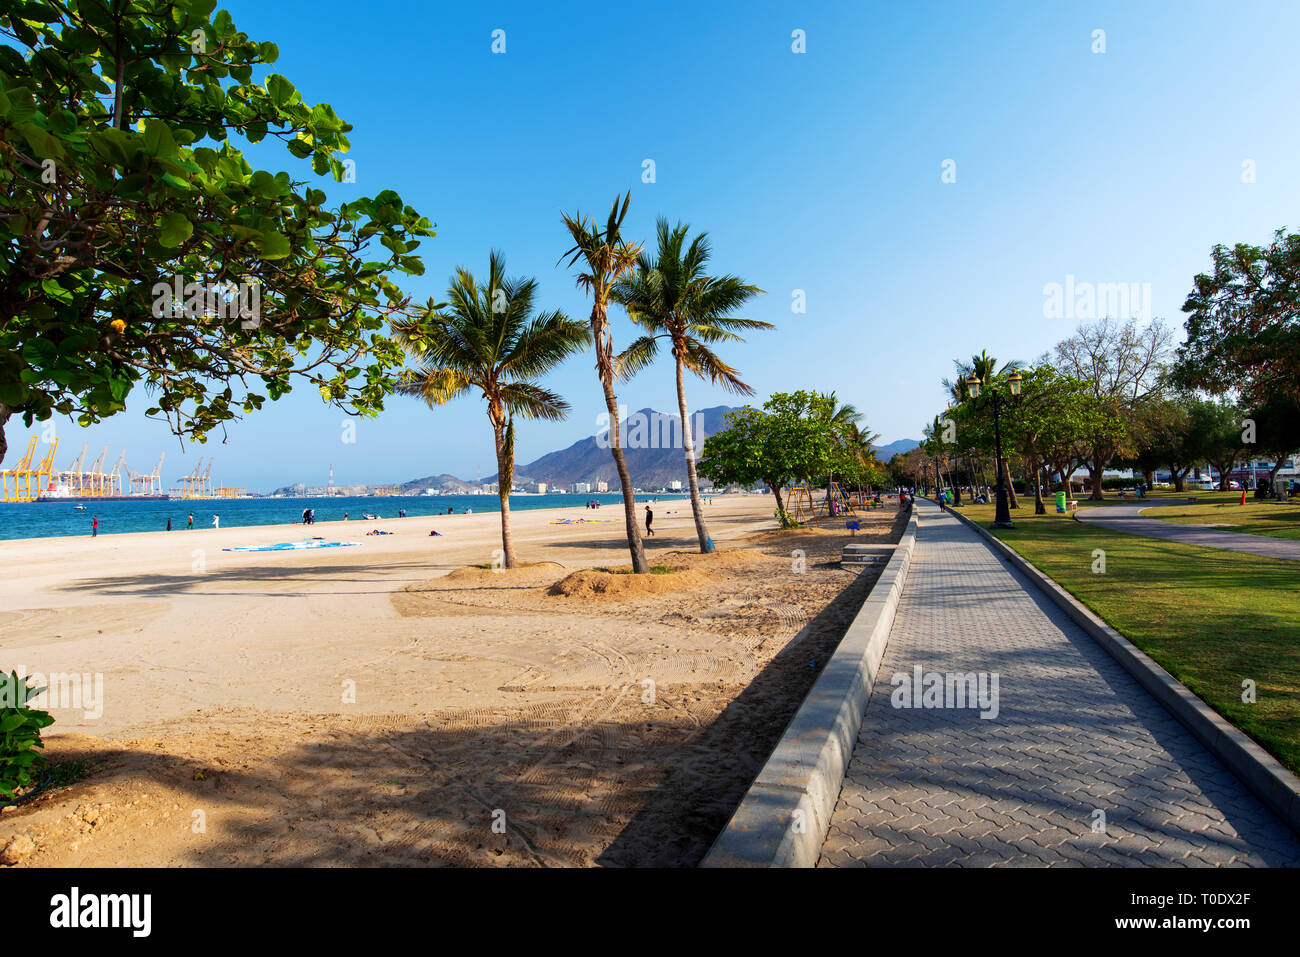 Khor Fakkan, United Arab Emirates - March 16, 2019: Khor Fakkan public beach in the emirate of Sharjah in United Arab Emirates on a sunny day Stock Photo